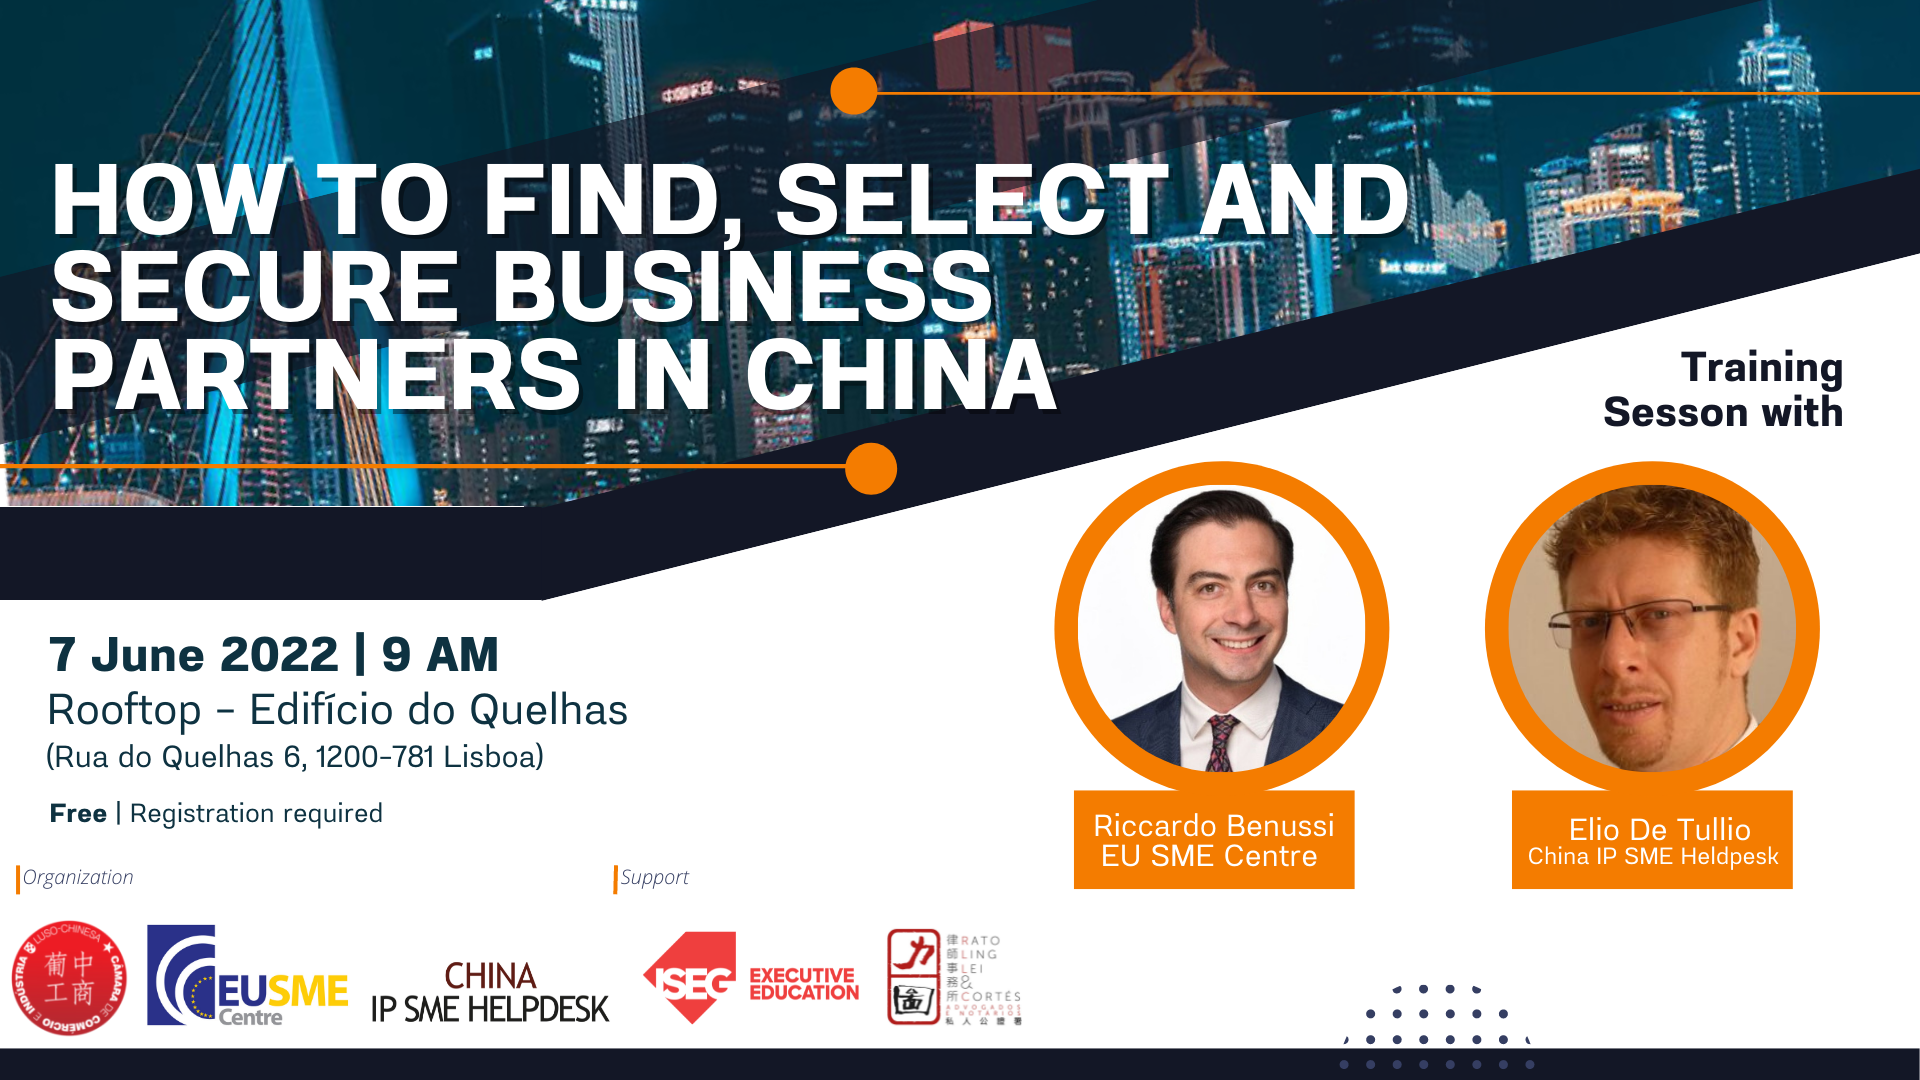 Partnering for Success: How to Find, Select and Secure Business Partners in China